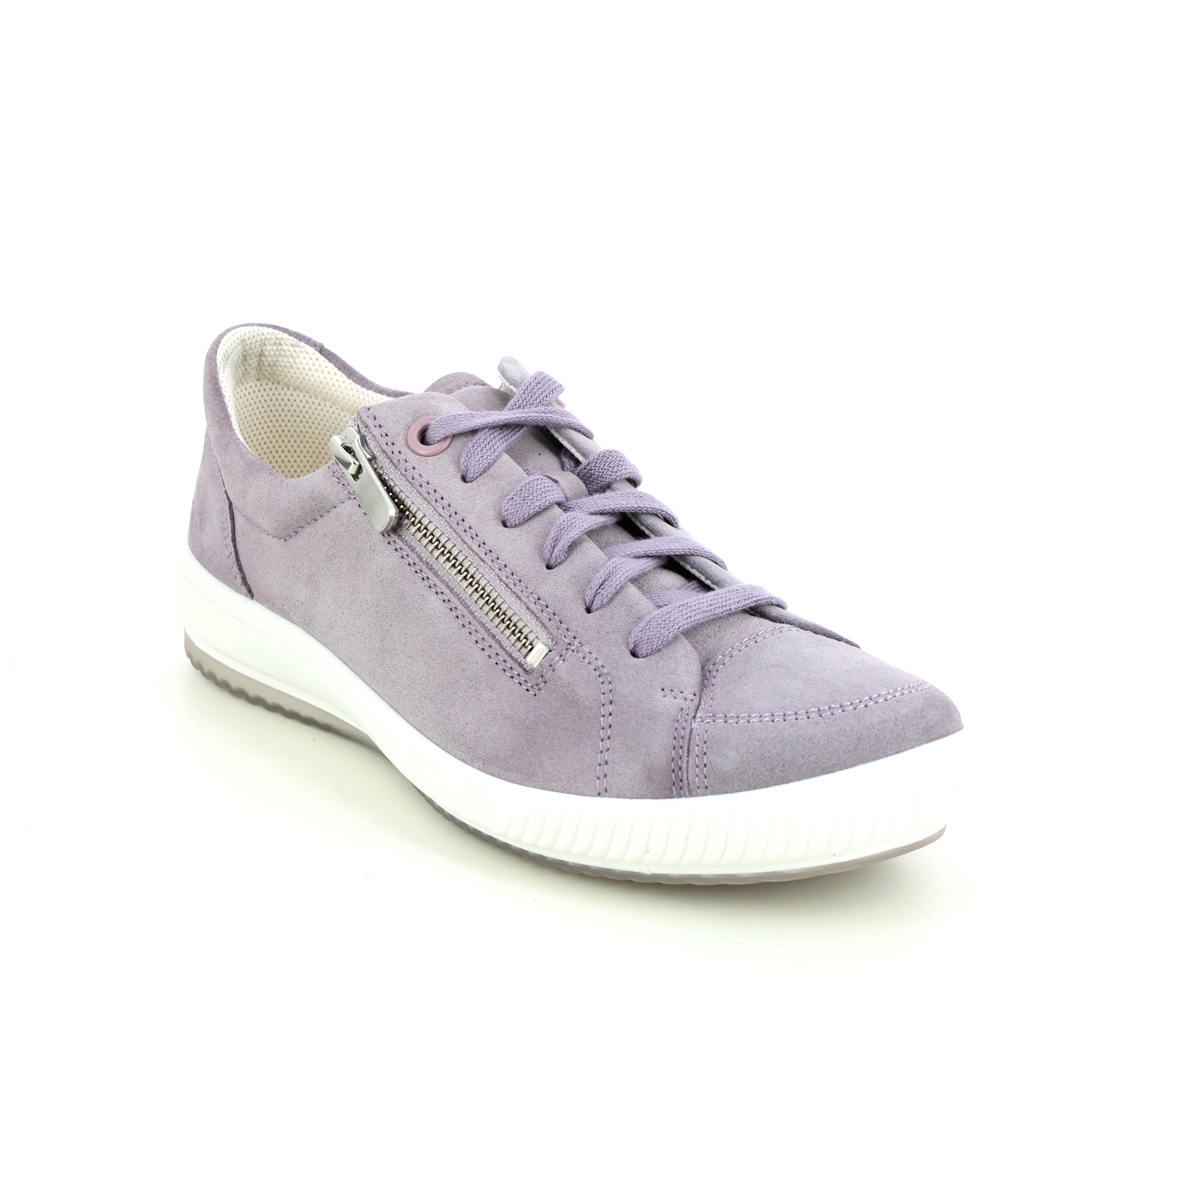 Legero Tanaro 5 Zip Lilac Womens lacing shoes 2000162-8530 in a Plain Leather in Size 5.5